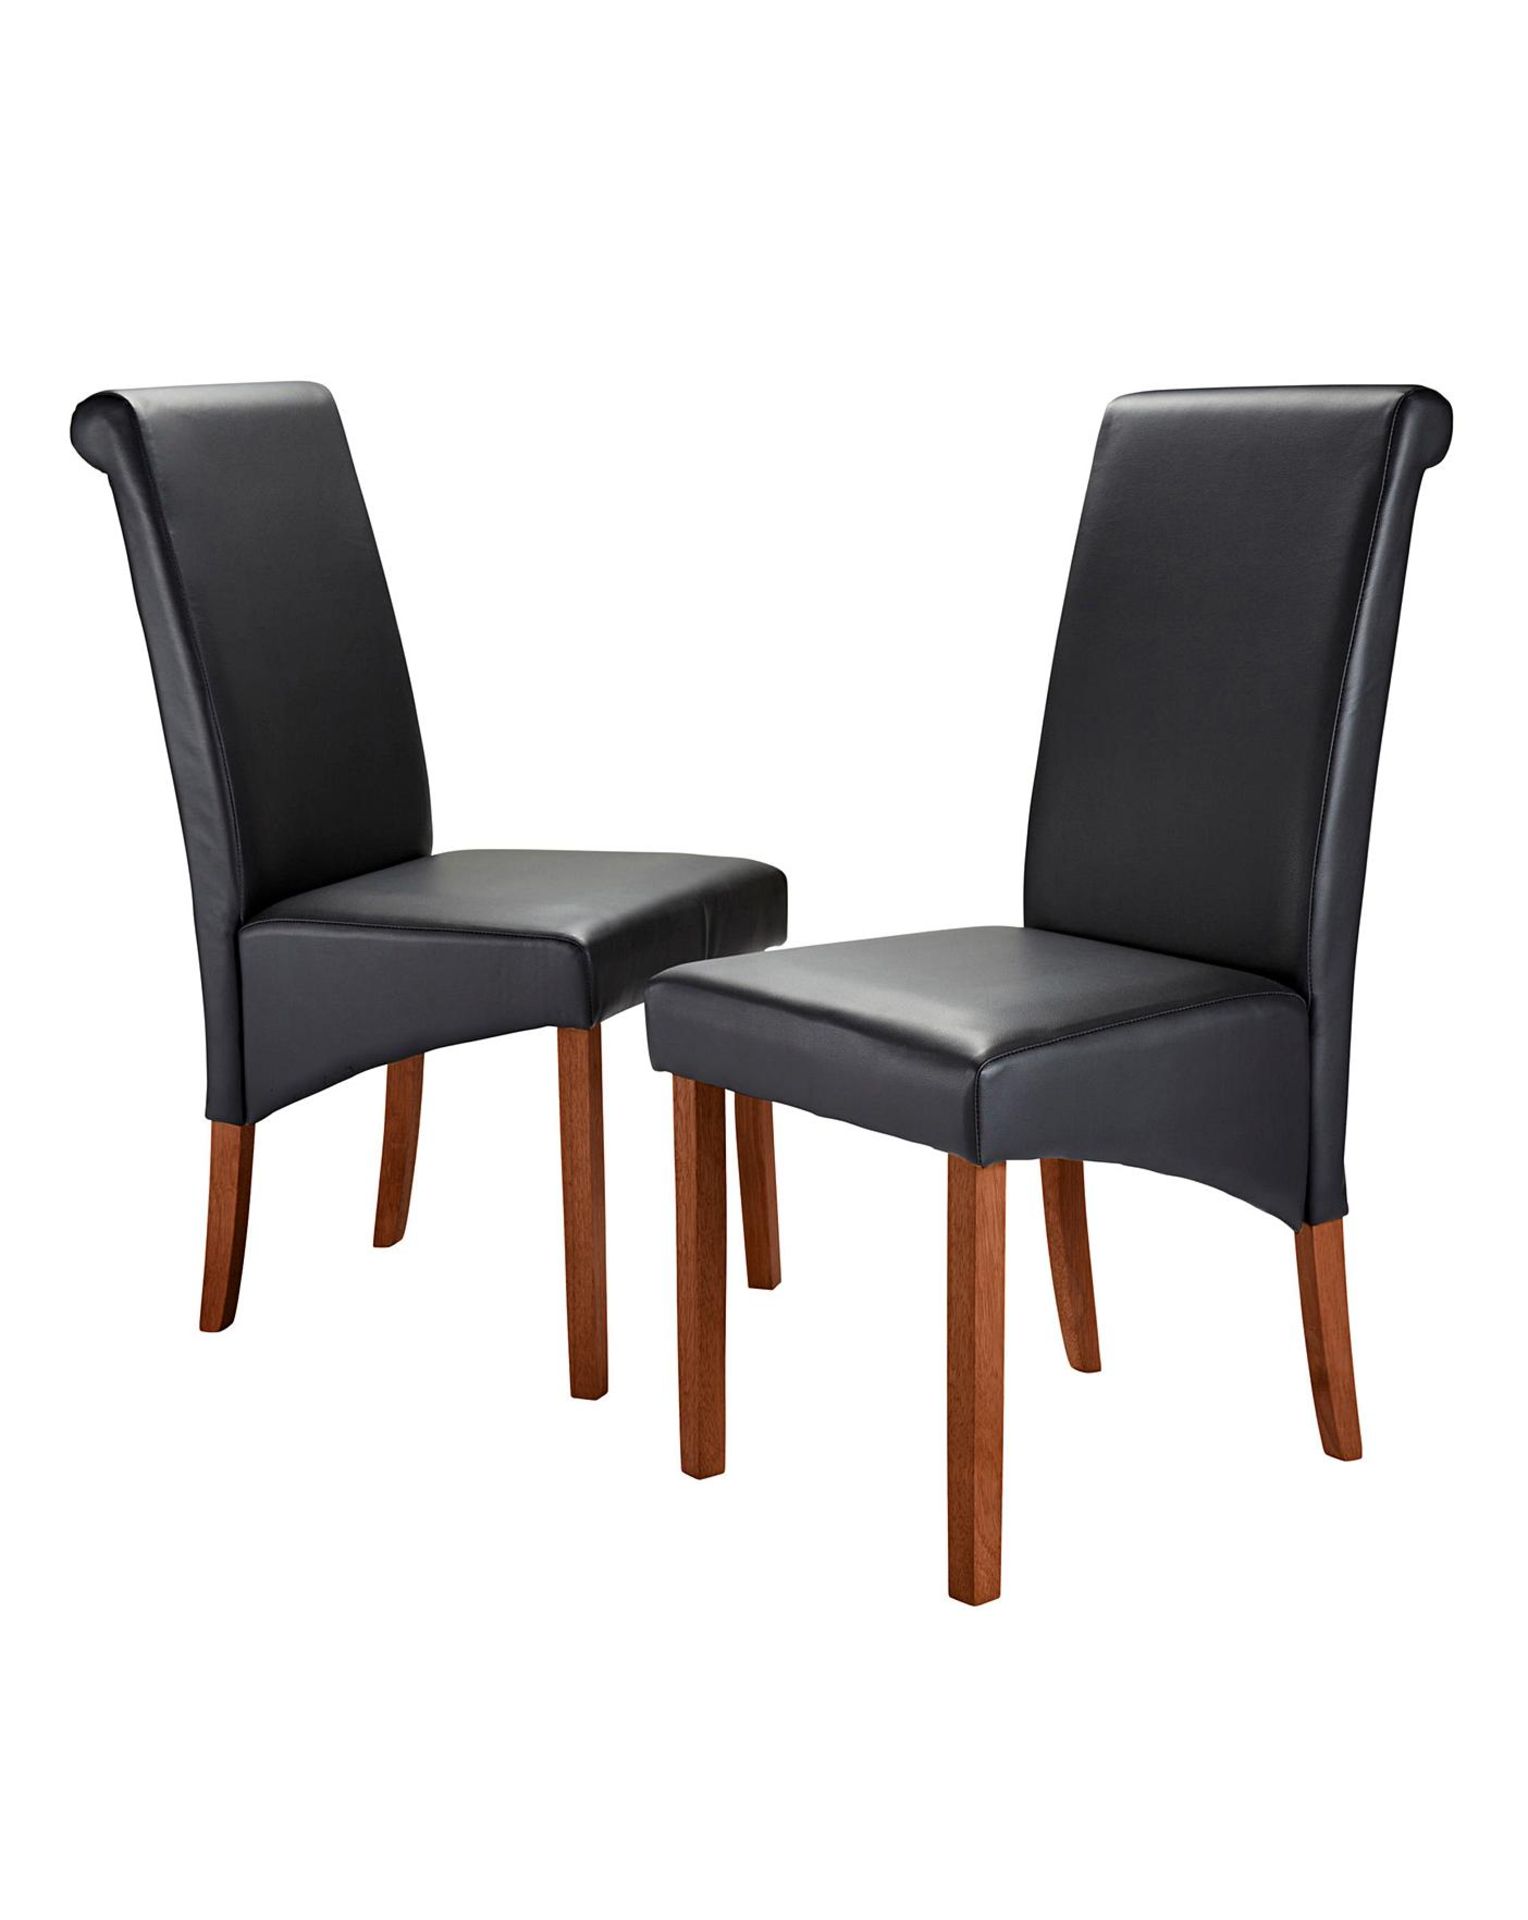 BRAND NEW SET OF 2 OAK EFFECT AND BLACK FAUX LEATHER DINING CHAIRS S1R5